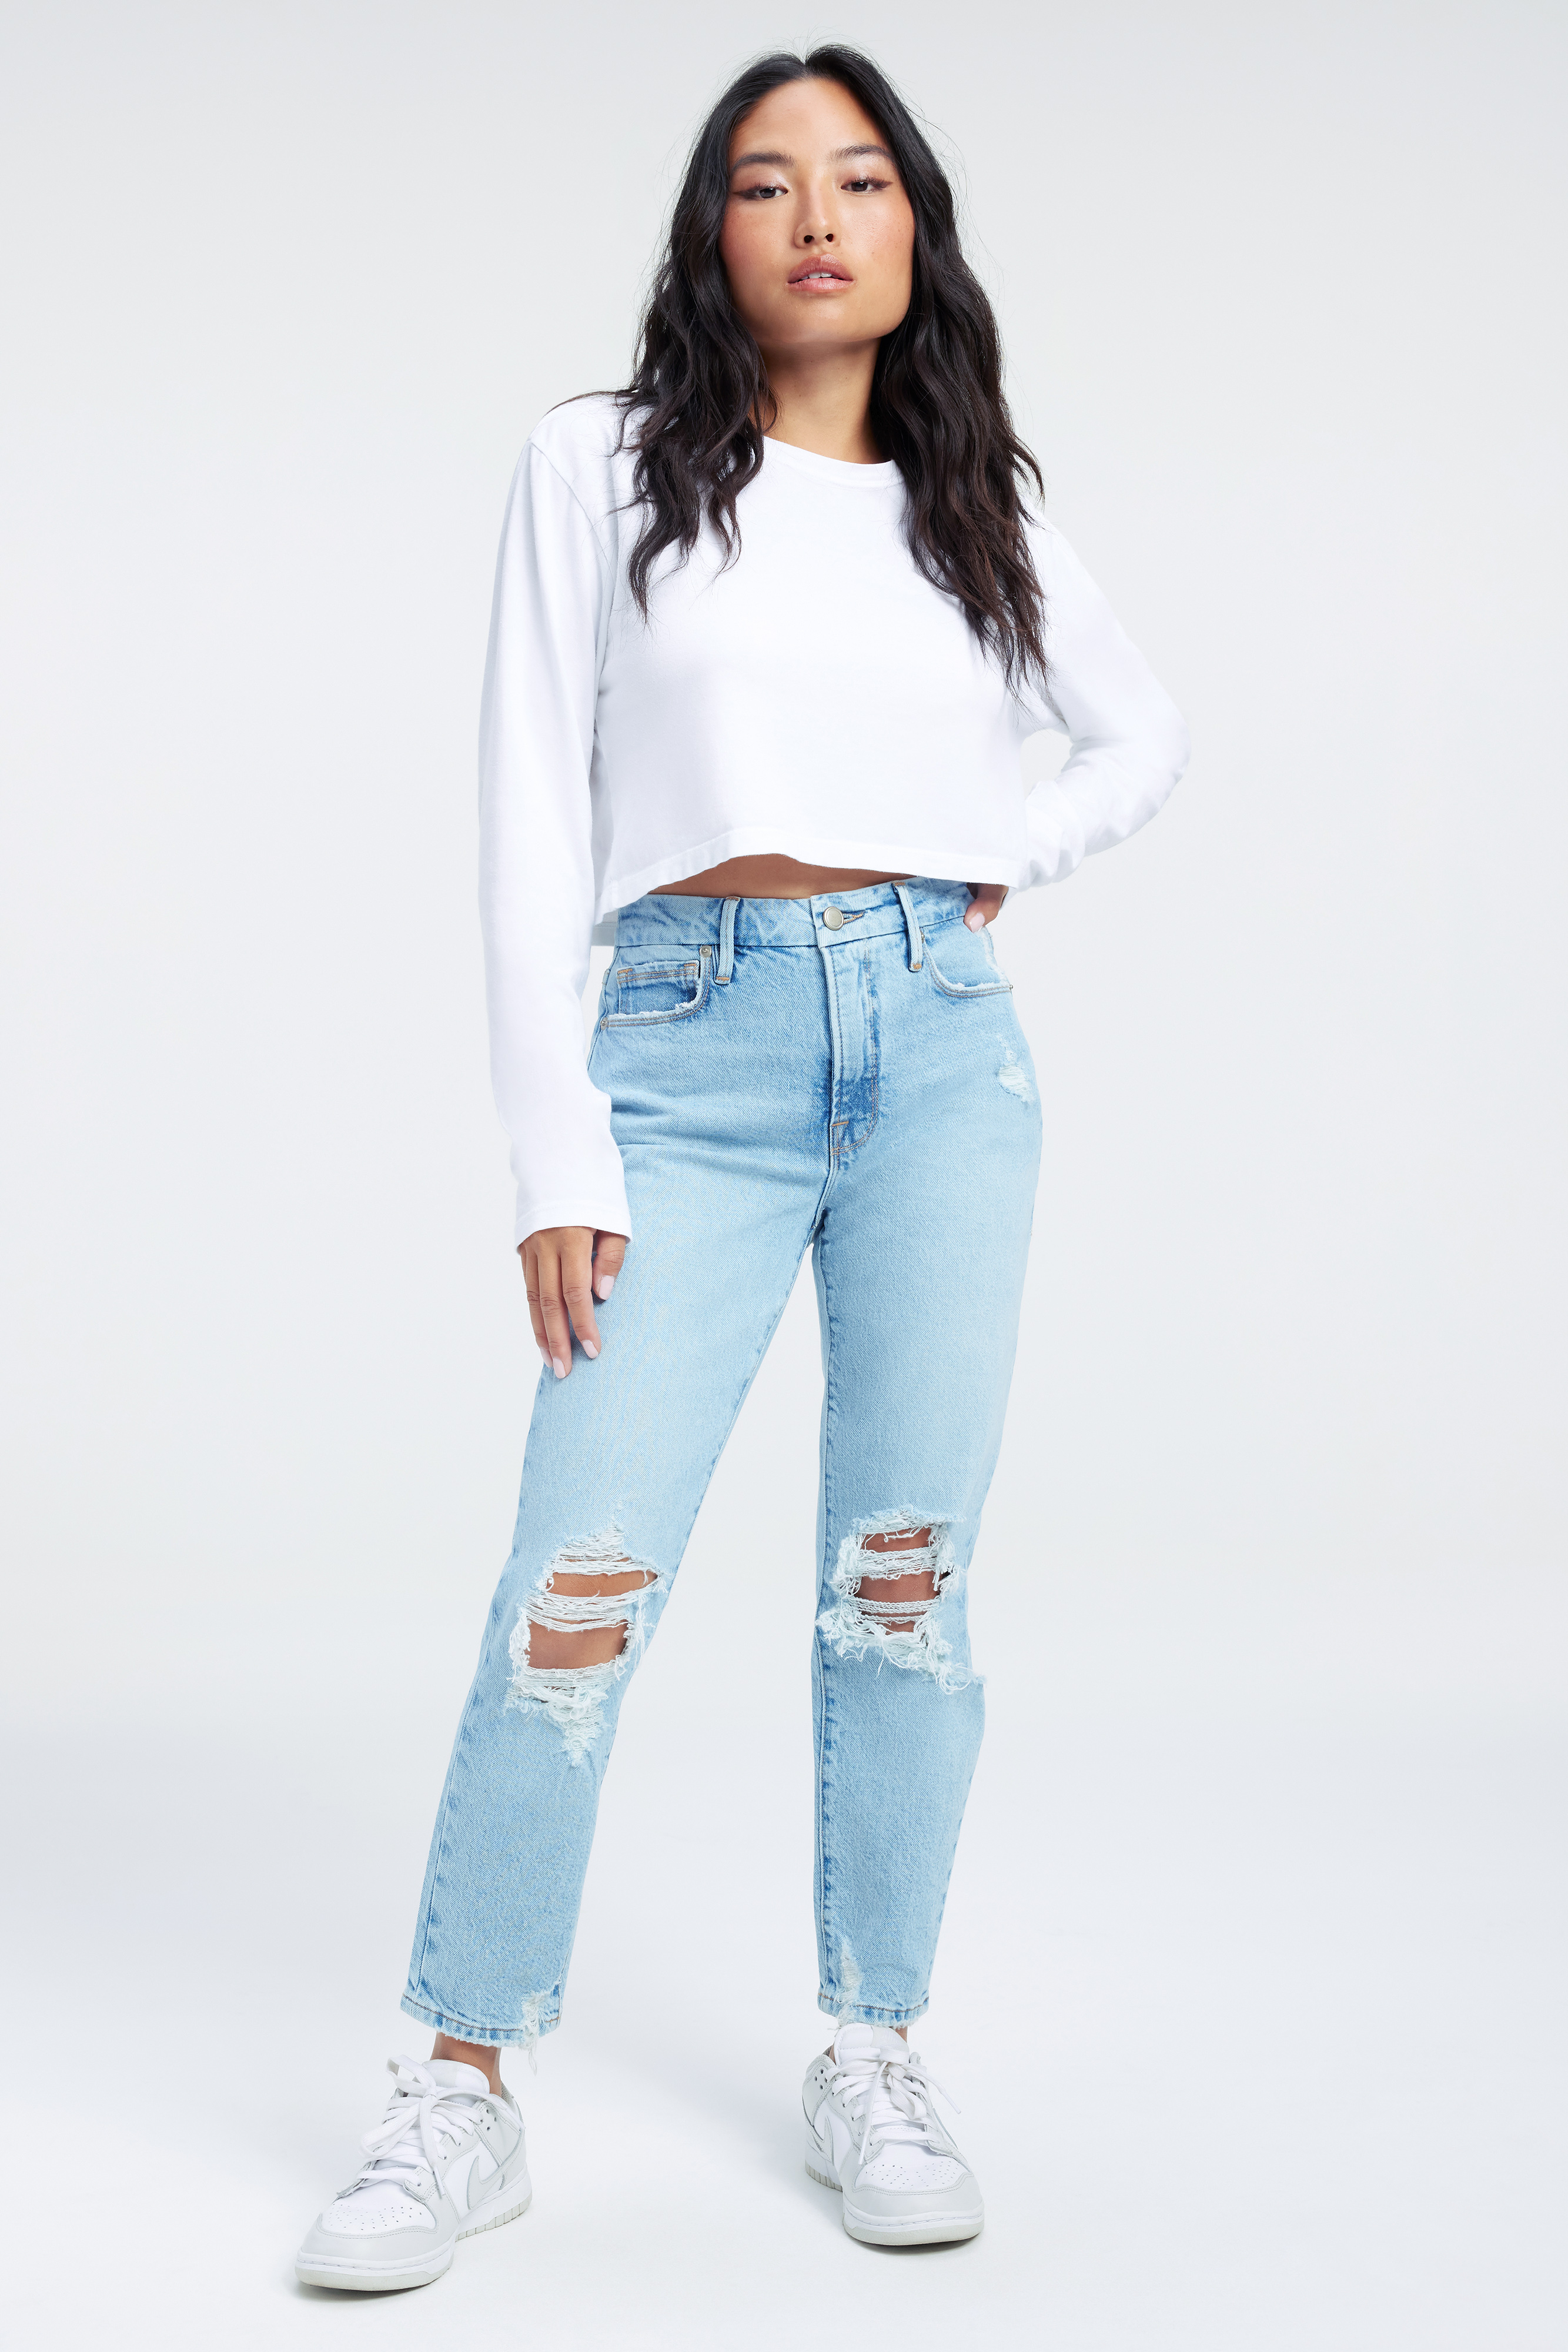 Styled with GOOD PETITE GIRLFRIEND JEANS | INDIGO251